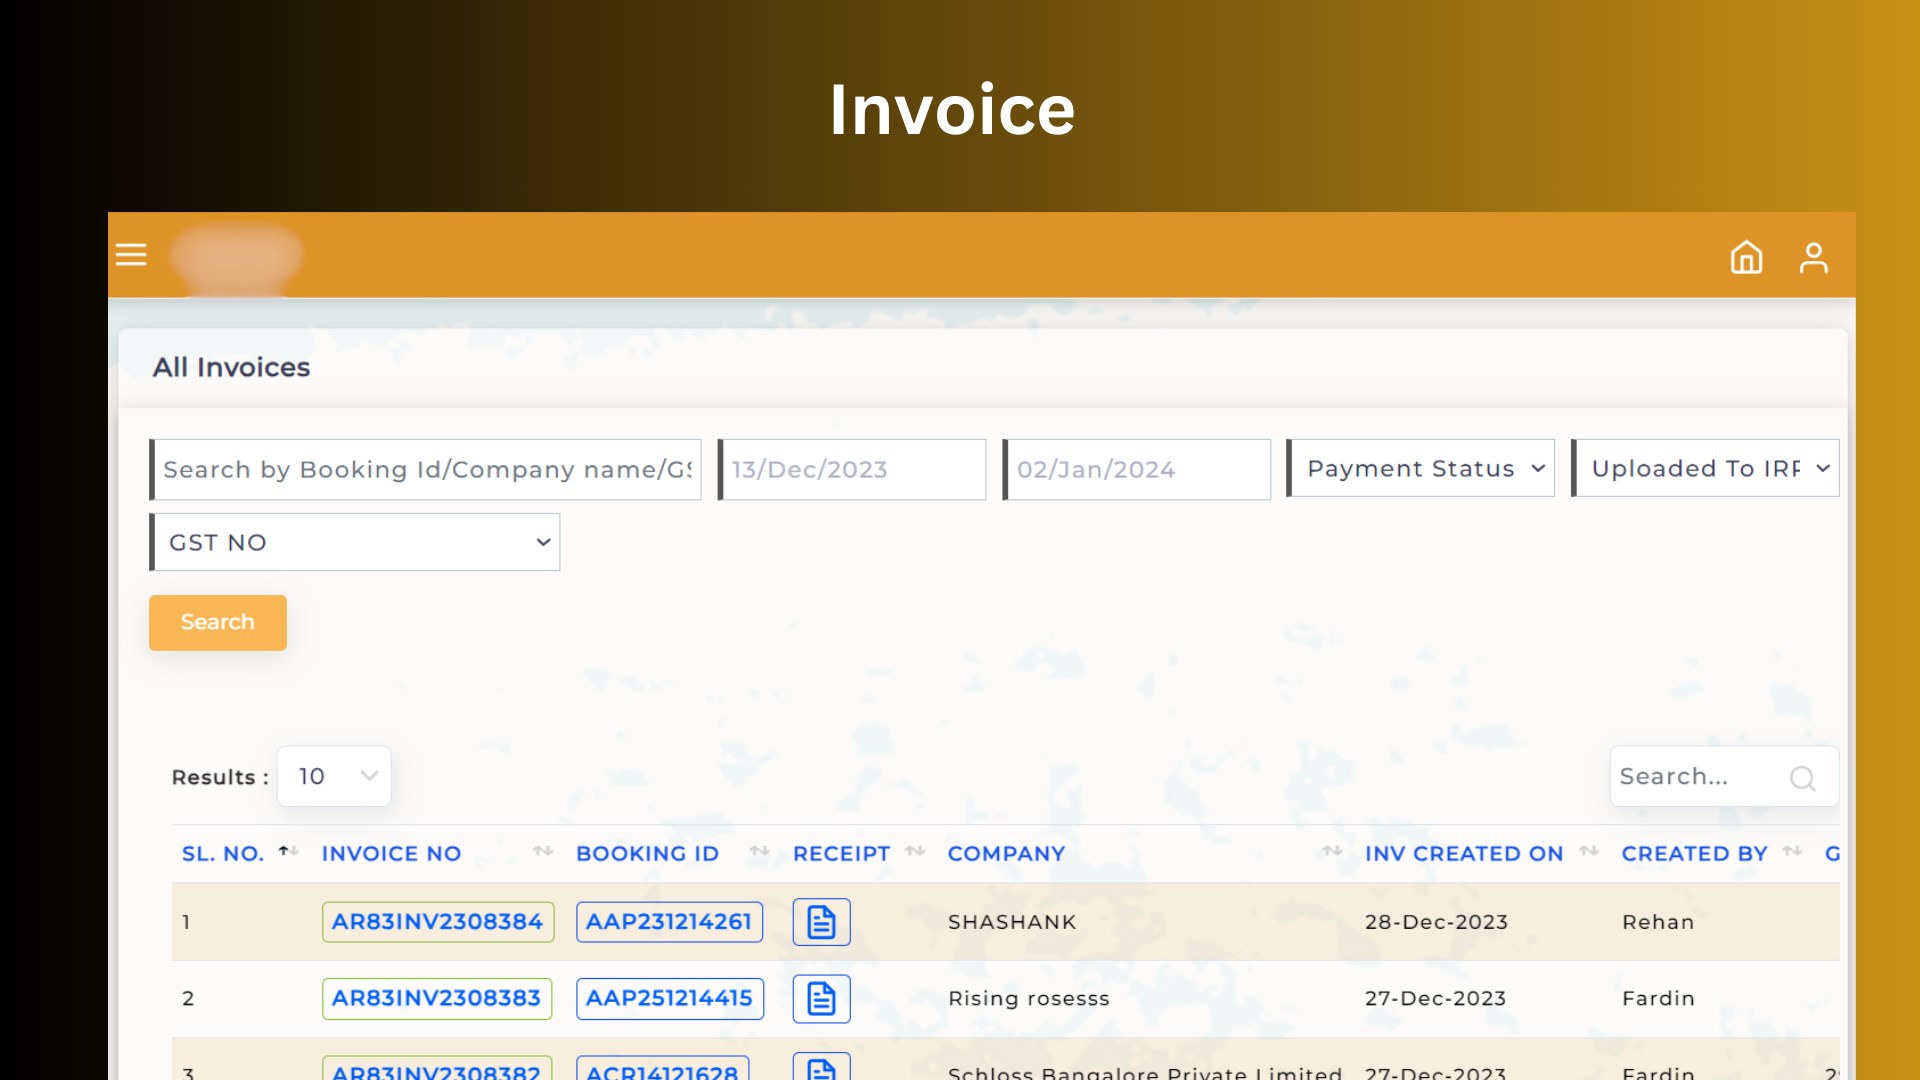 Integrated a feature that allows users to view invoices for all bookings in a single location, providing a convenient and centralized platform for managing payment details.